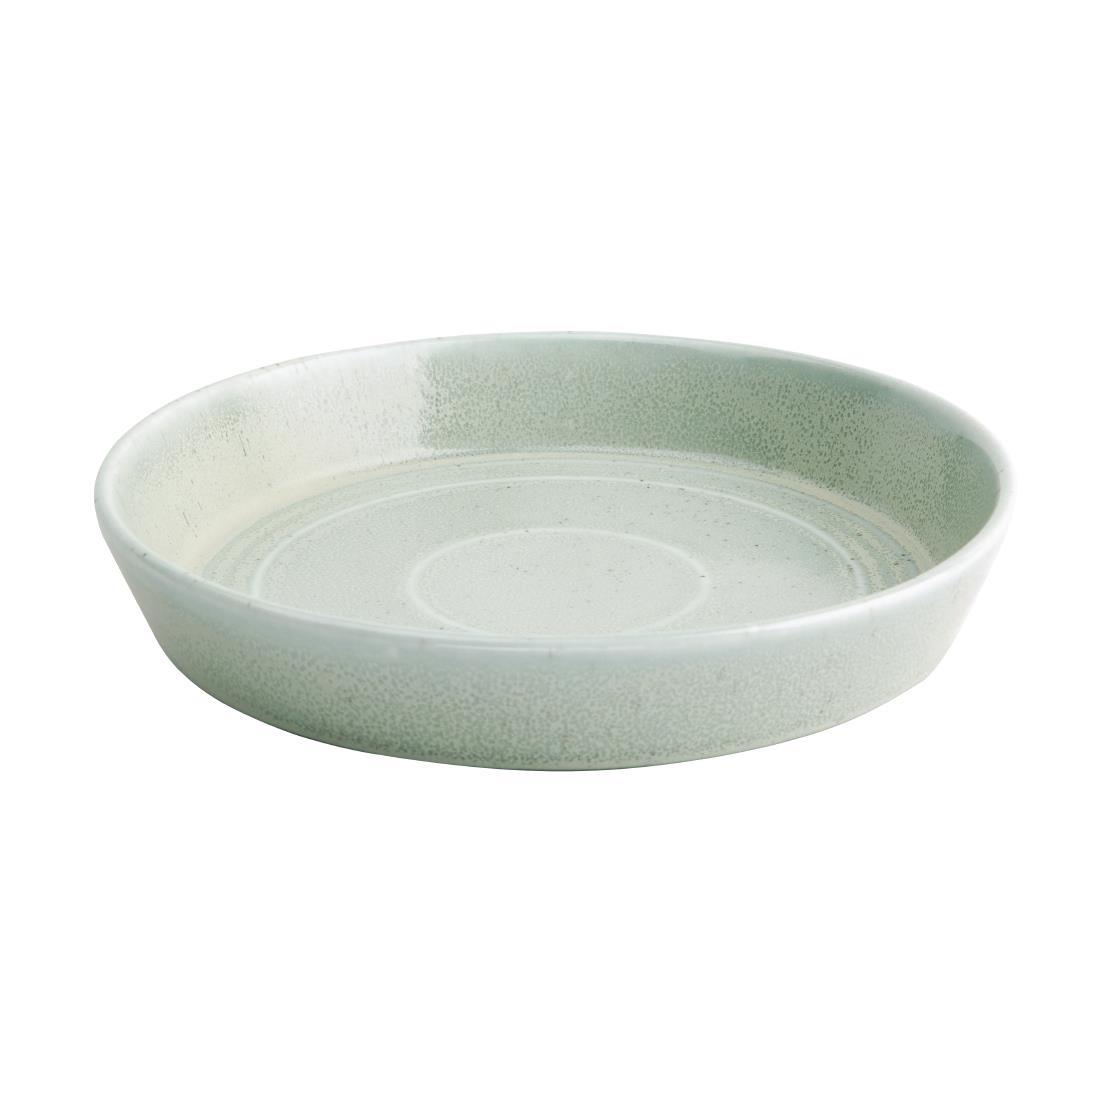 Olympia Cavolo Flat Round Bowls Spring Green 220mm (Pack of 4) - FB561  - 1